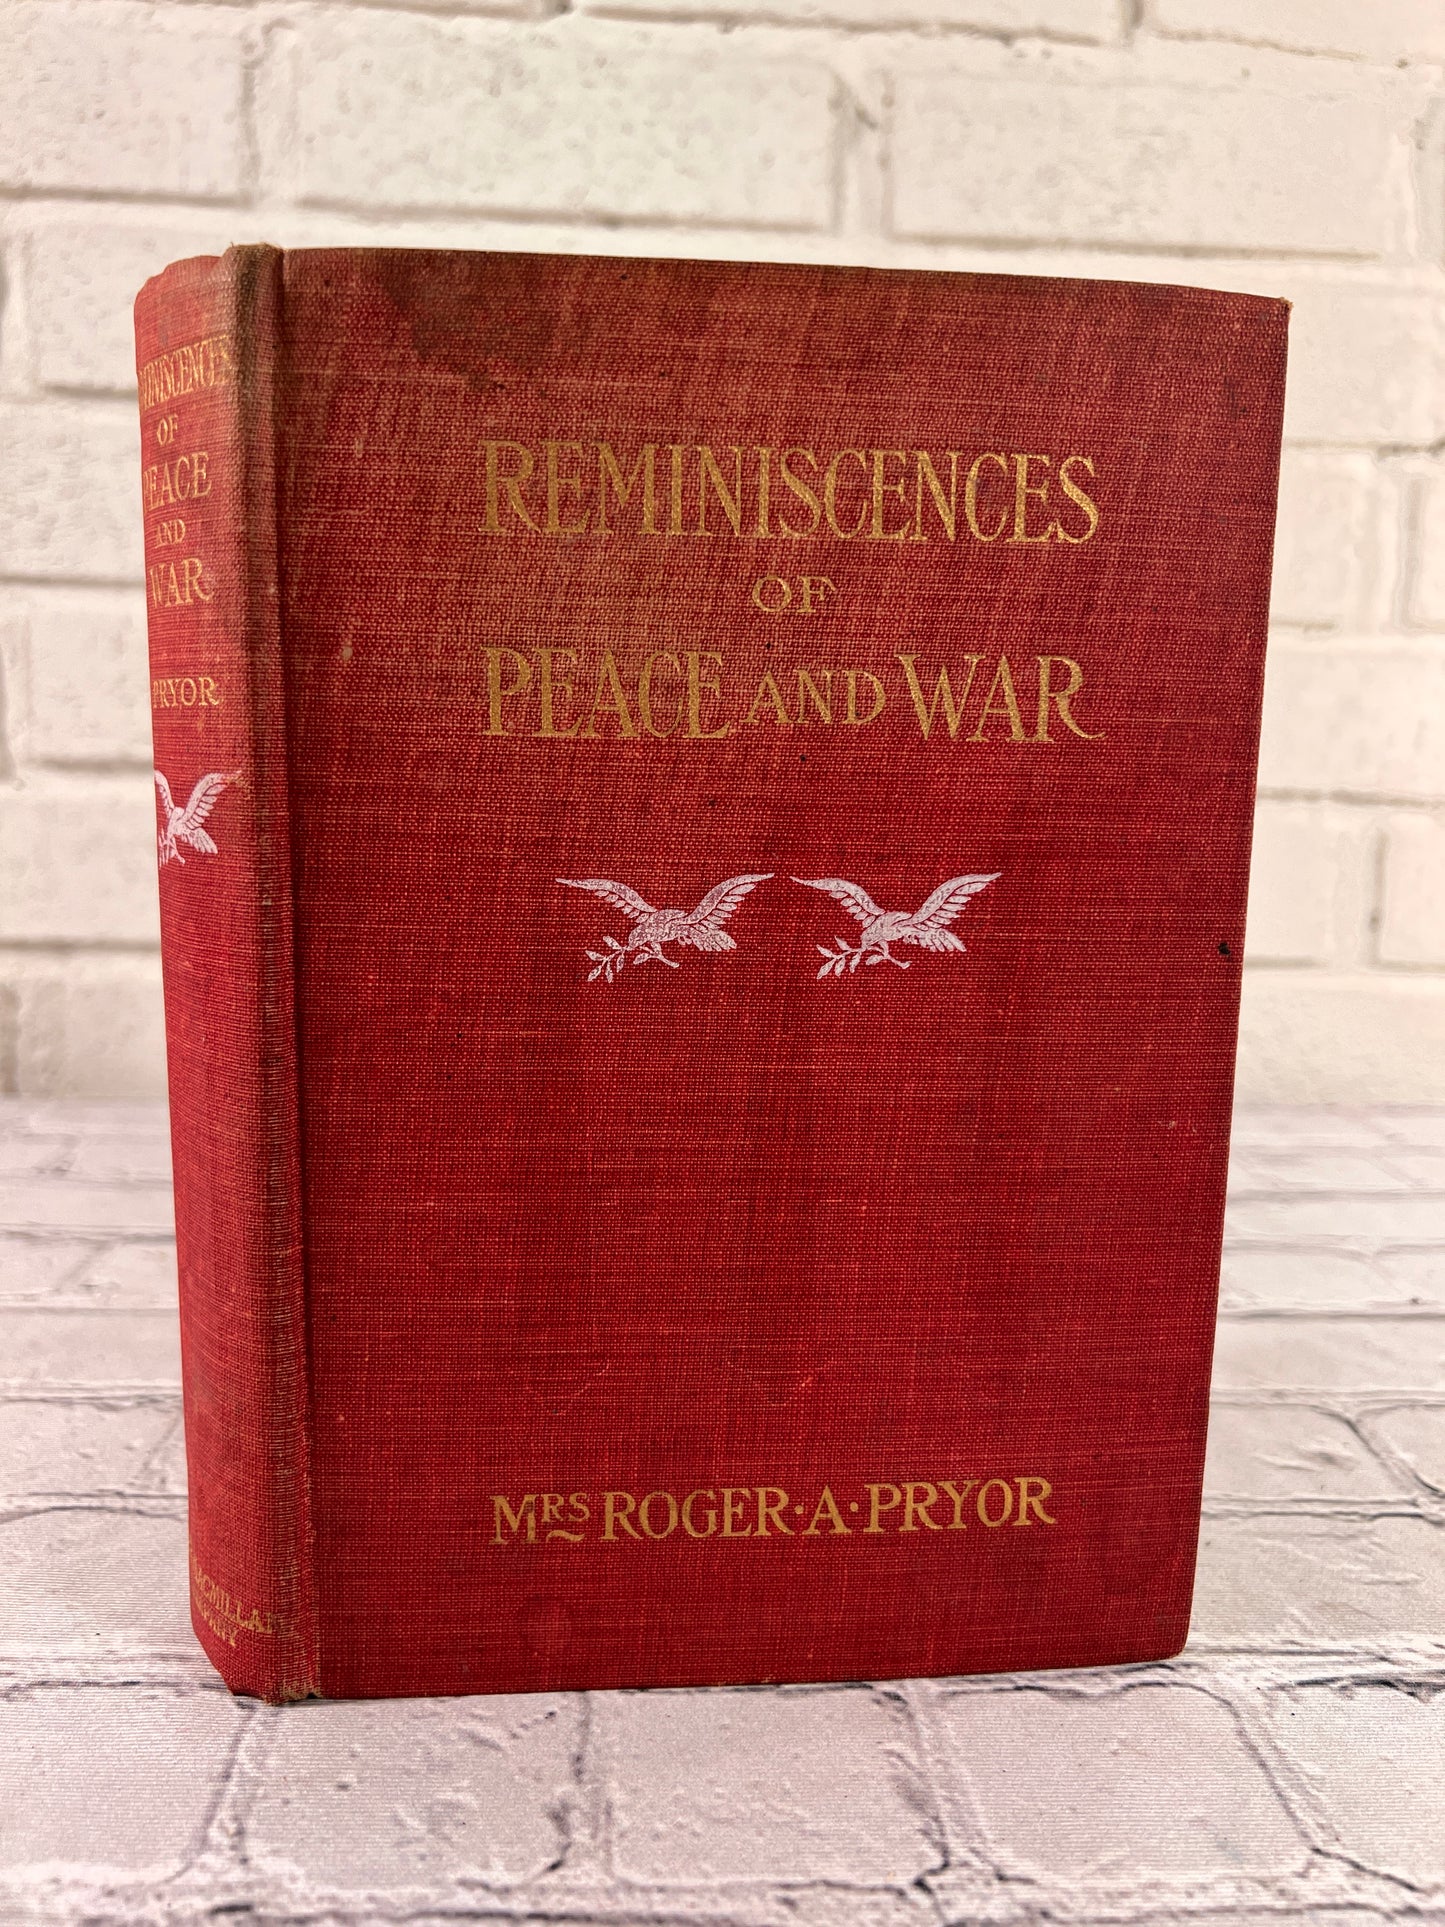 Reminiscences of Peace and War by Mrs. Roger A. Pryor [1904]